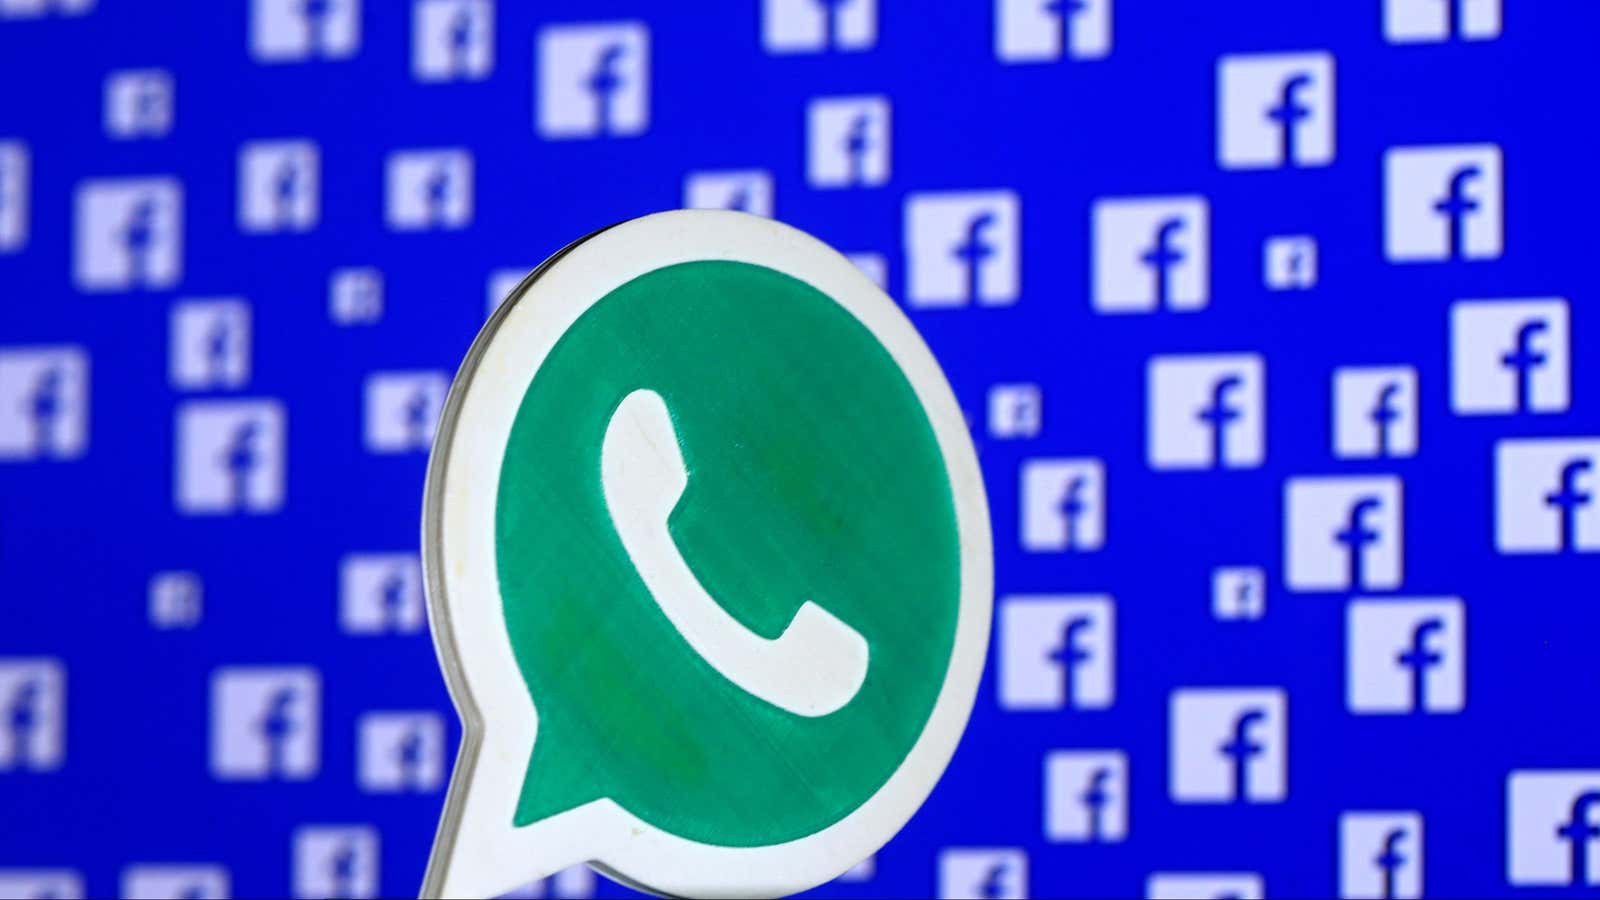 WhatsApp is out front over its parent Facebook in Africa